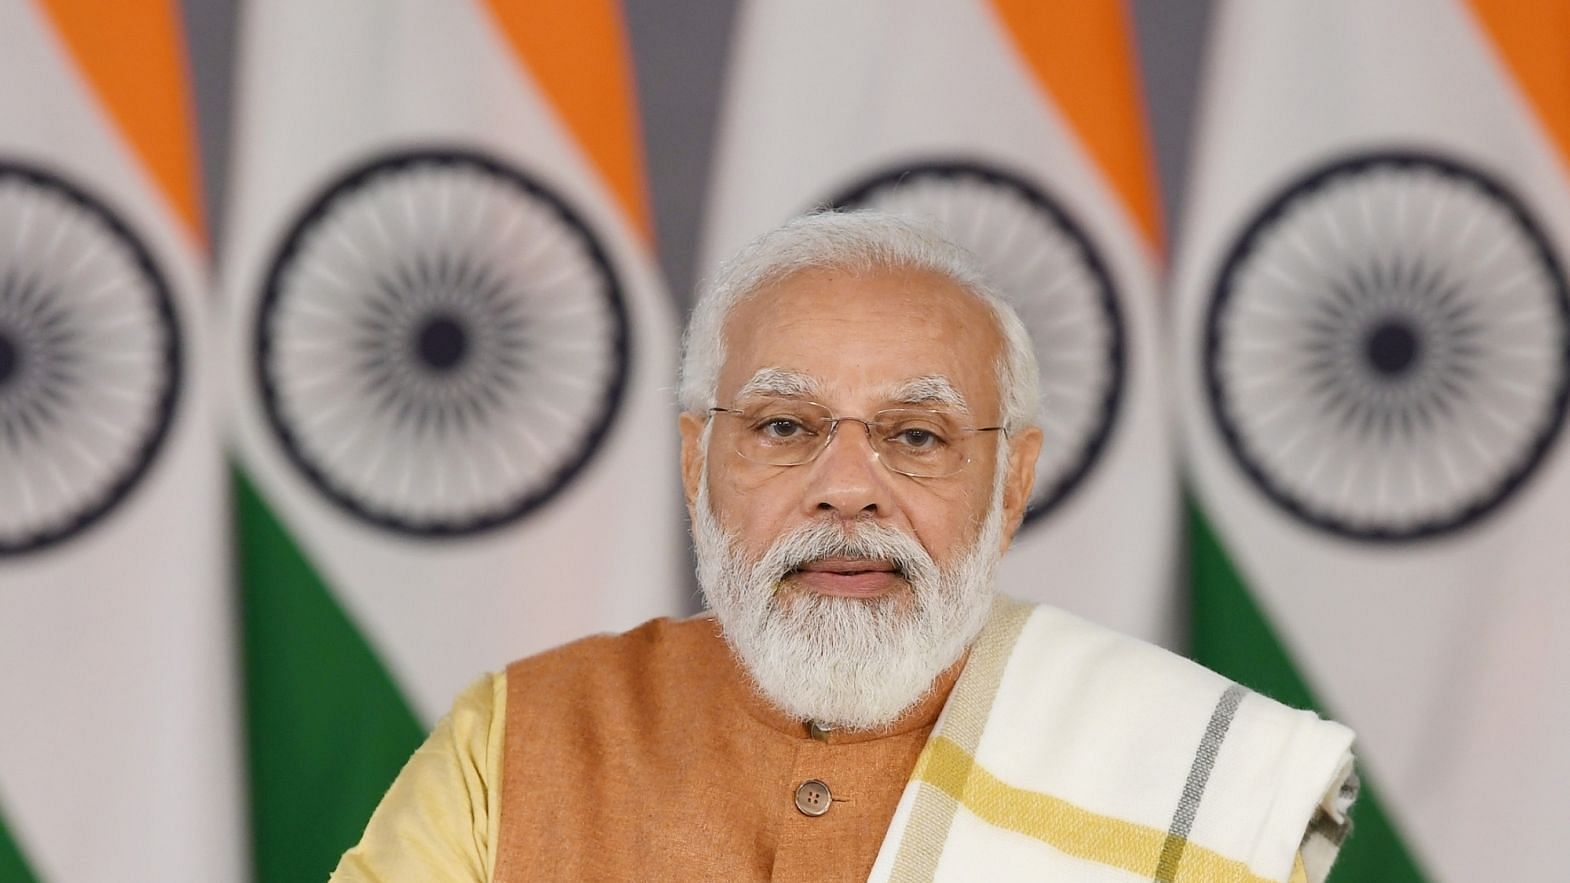 <div class="paragraphs"><p>Prime Minister Narendra Modi on Wednesday, 30 March virtually addressed the Bay of Bengal Initiative for Multi-Sectoral Technical and Economic Cooperation (BIMSTEC) summit, encouraging increased regional cooperation.</p></div>